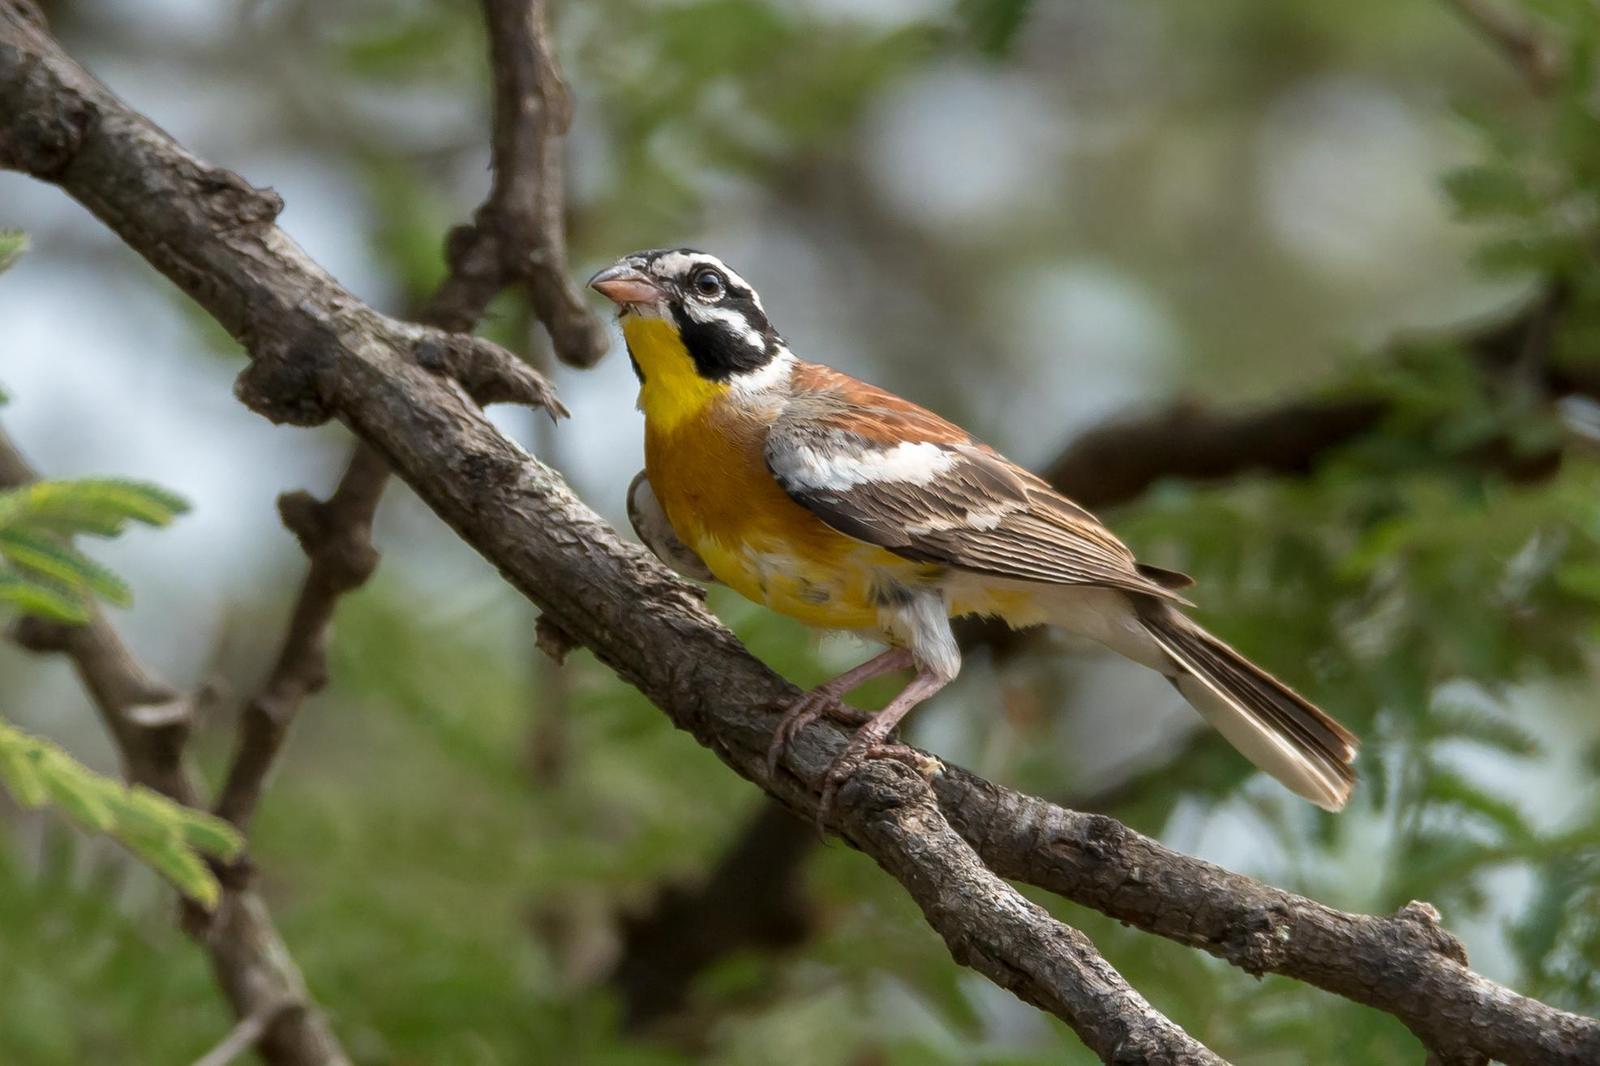 Golden-breasted Bunting Photo by Gerald Hoekstra